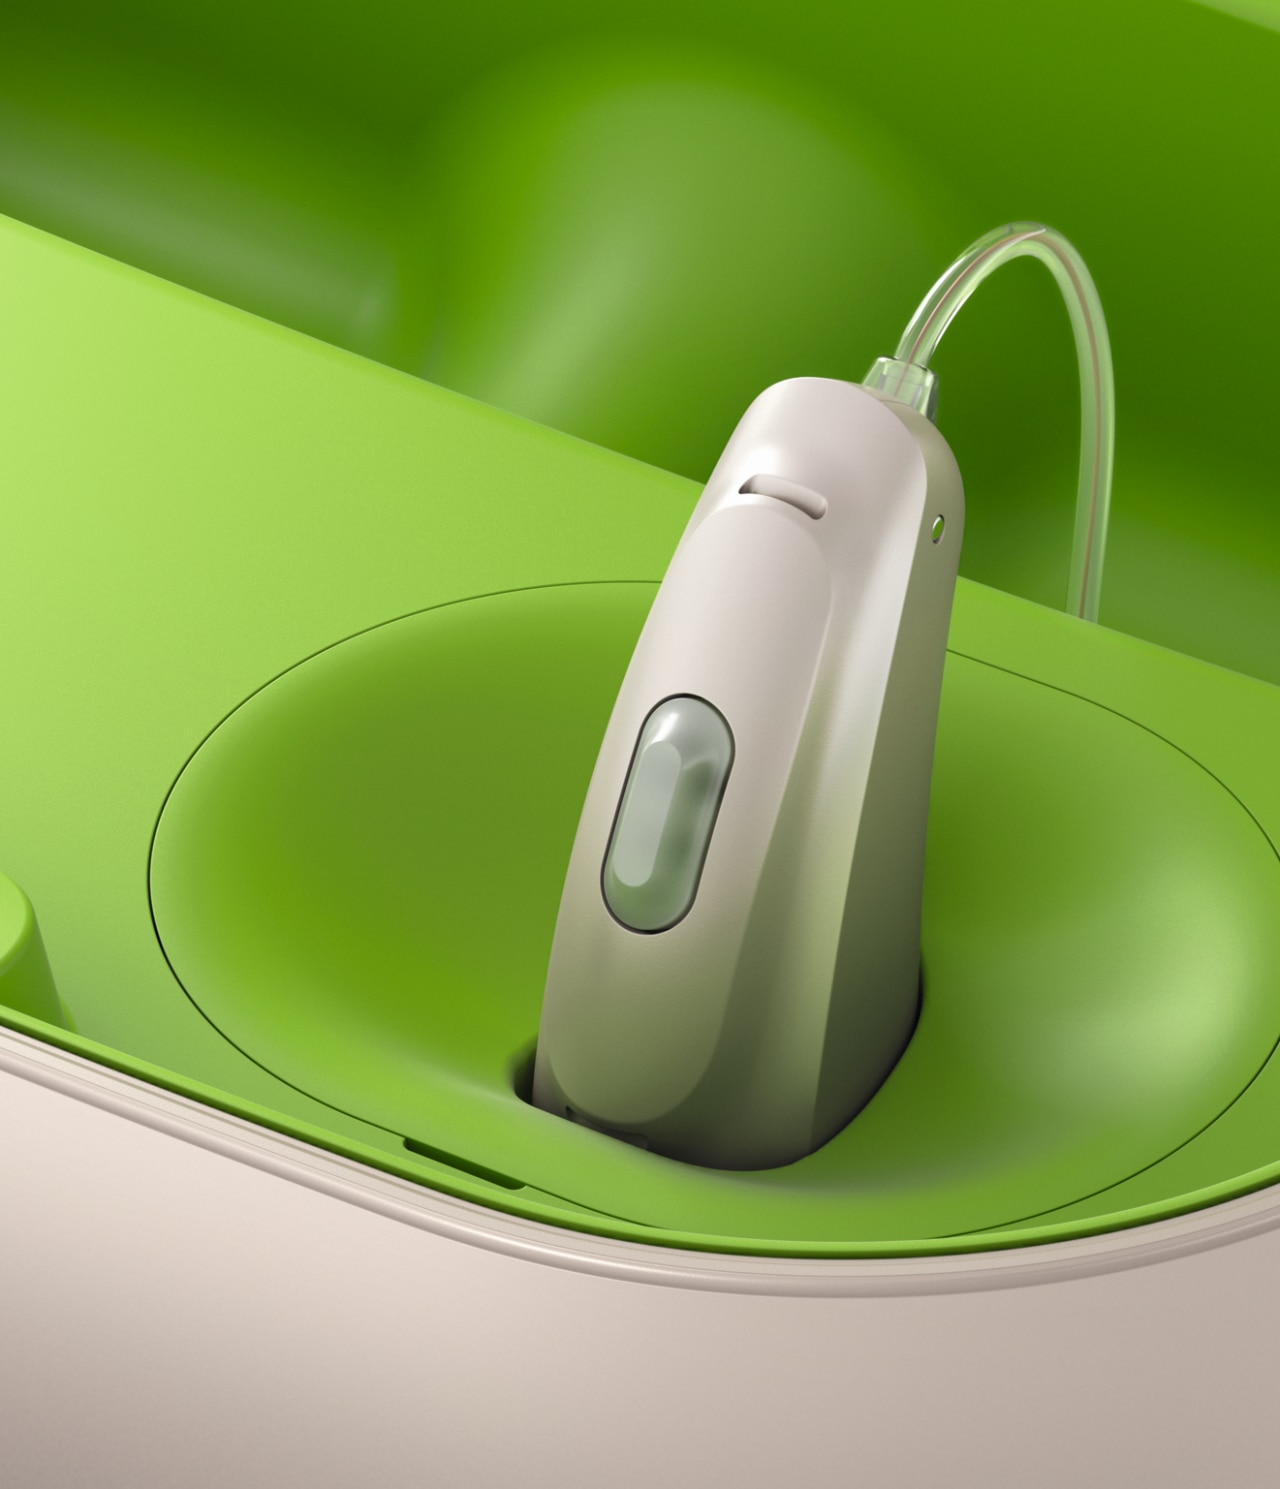 Charger case with Phonak Audeo B-R hearing aid.